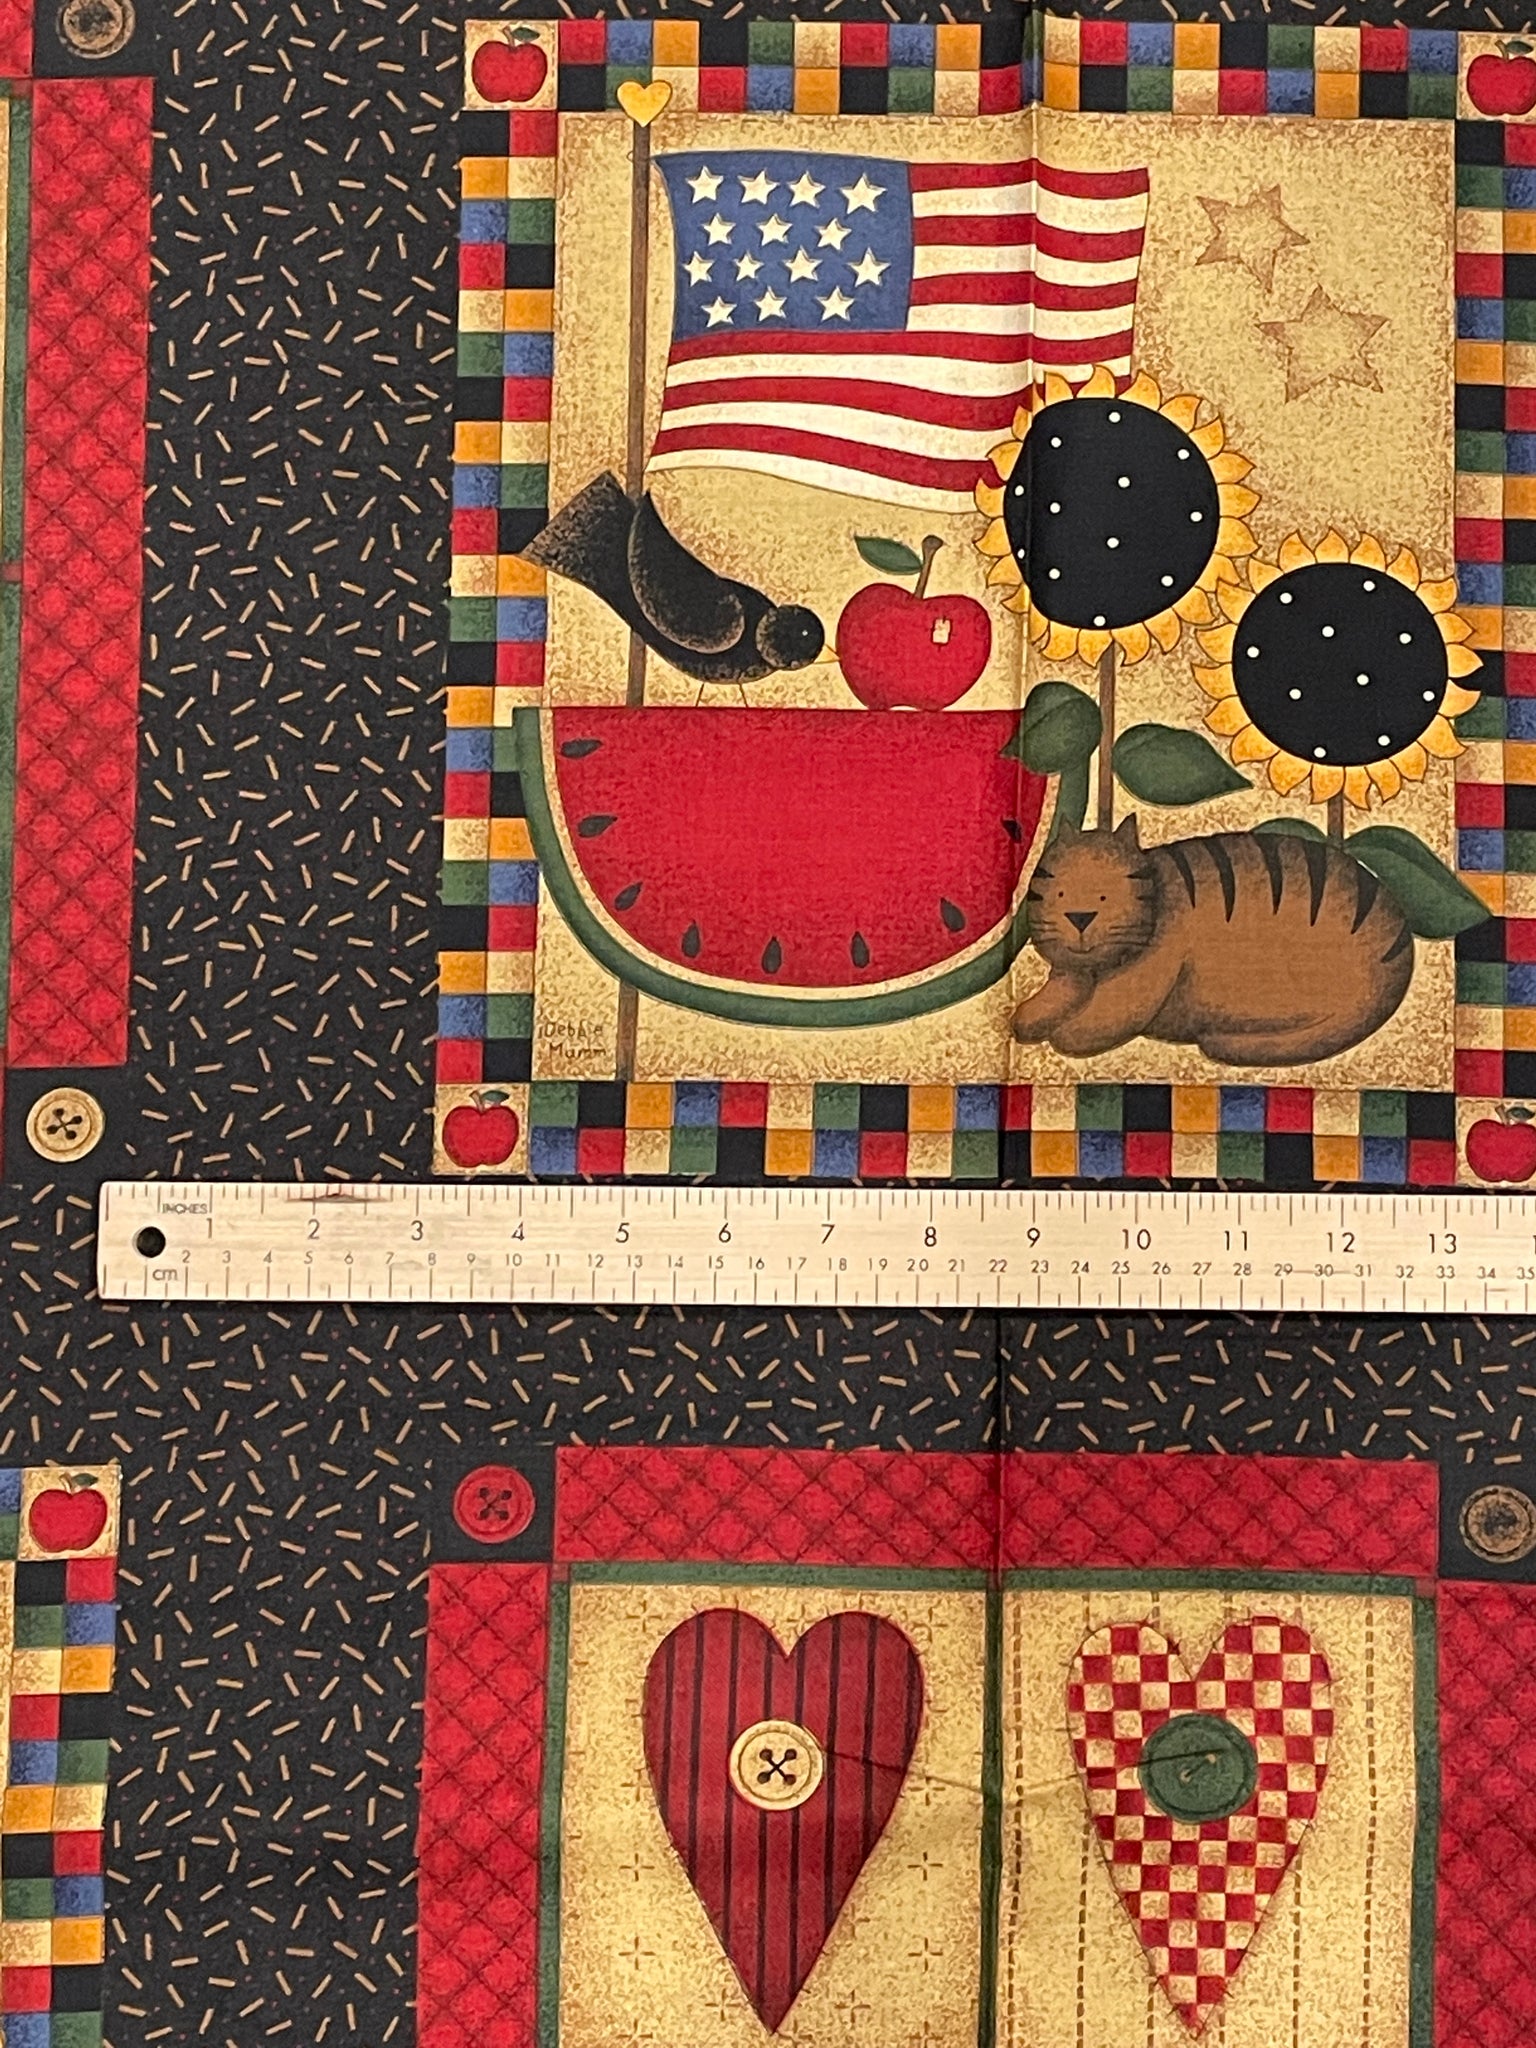 SALE Quilting Cotton - Hearts, Flags and Watermelon